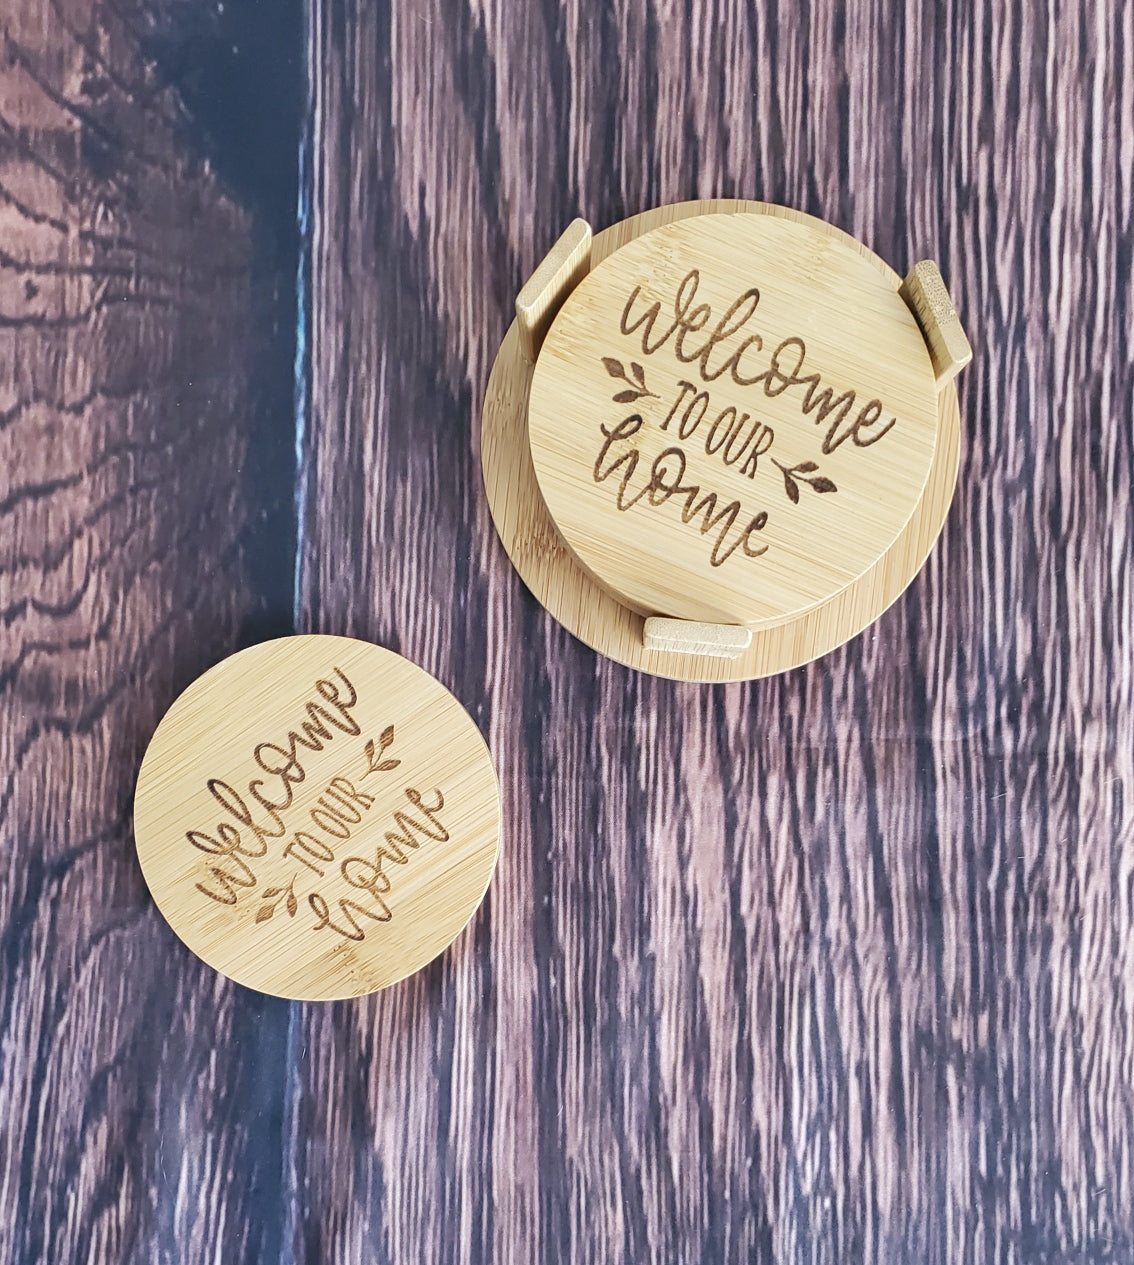 
Bamboo Coasters, Personalized Bamboo Wooden Drink Coasters, Laser Engraved (set of 4 w/ holder)